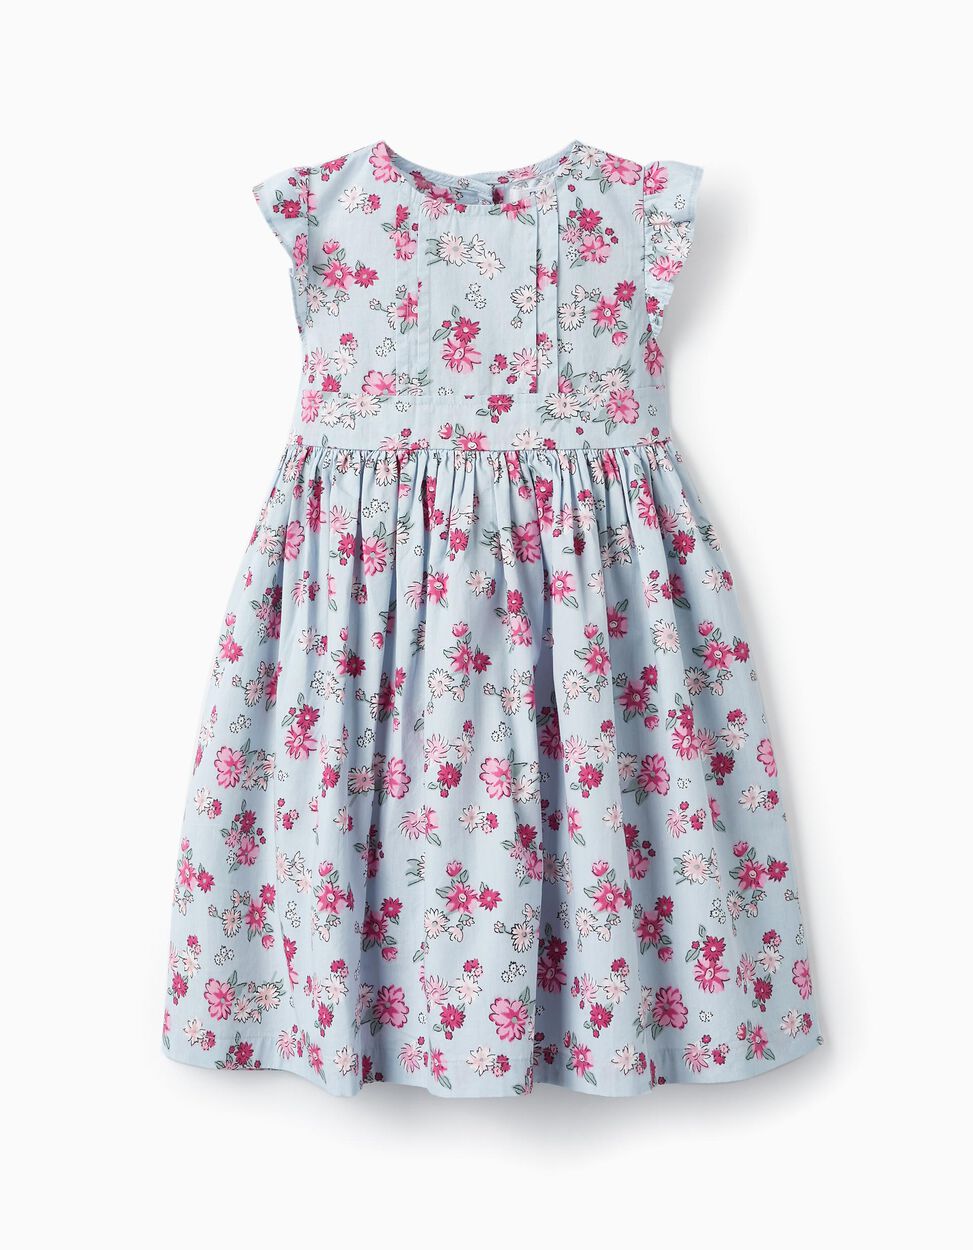 Buy Online Floral Dress with Ruffles for Girls, Light Blue